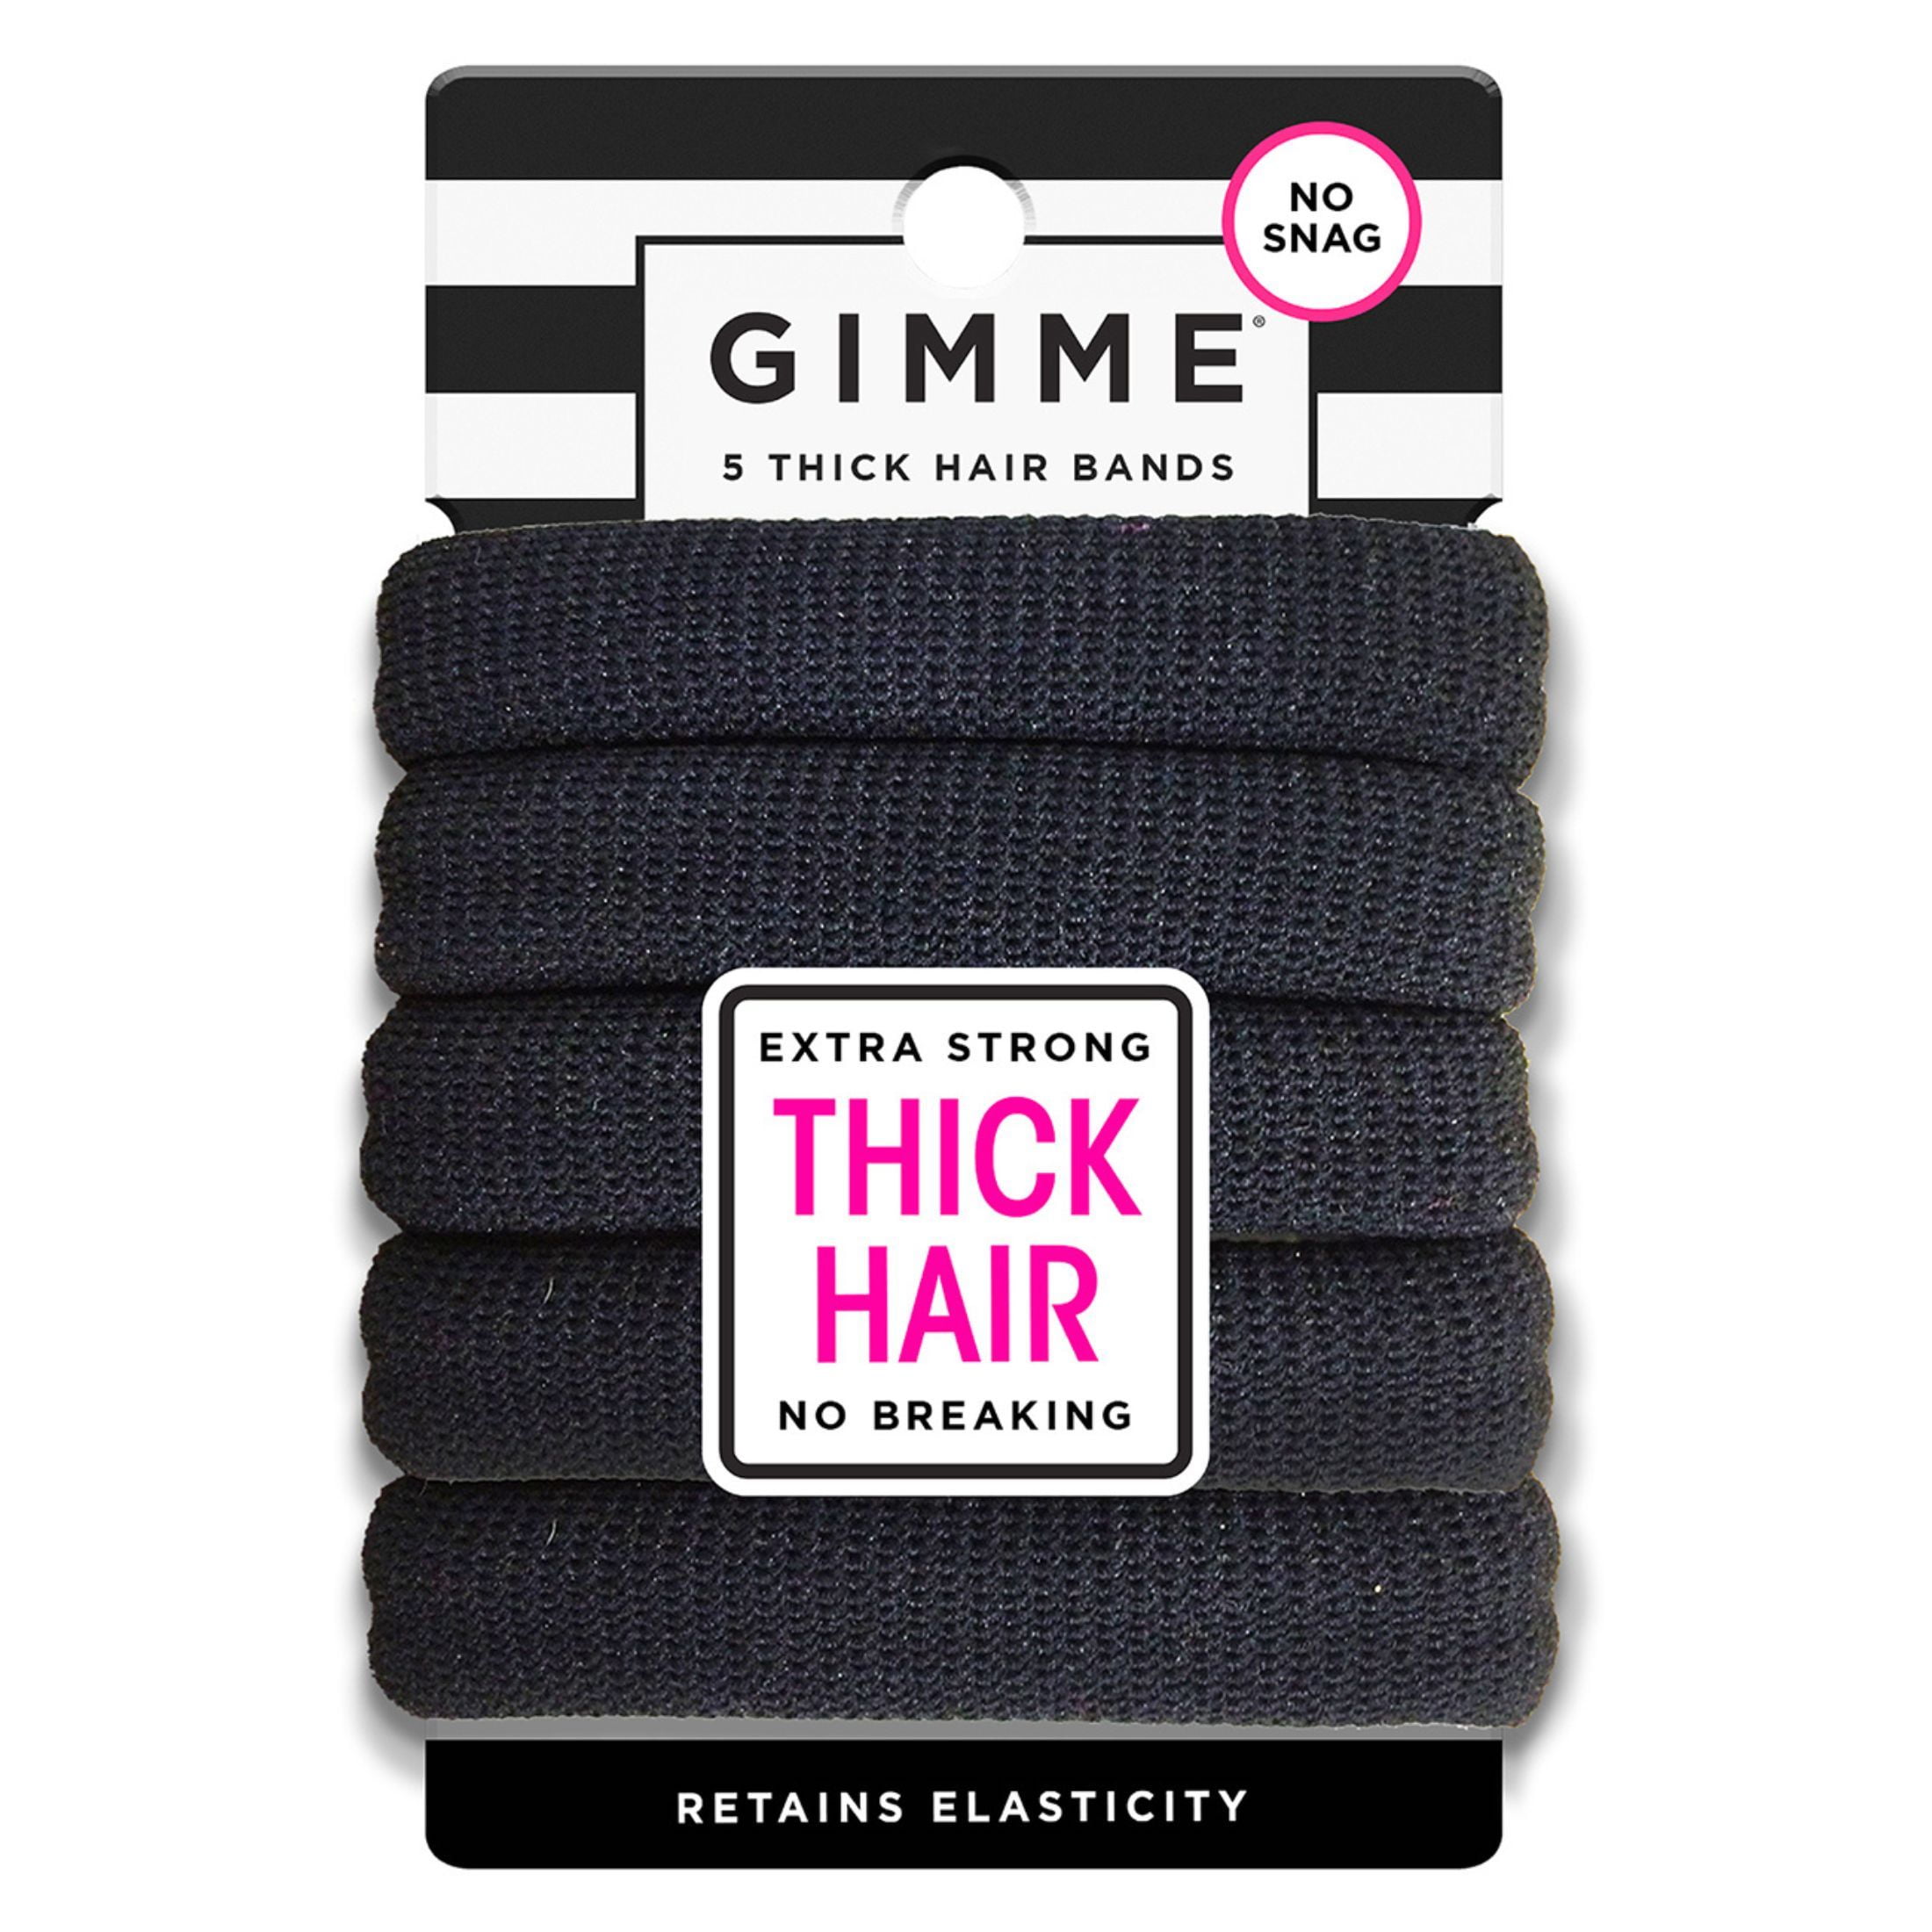 Gimme Ponytail Holder Hair Tie for Thick Hair, Black, 5 Ct